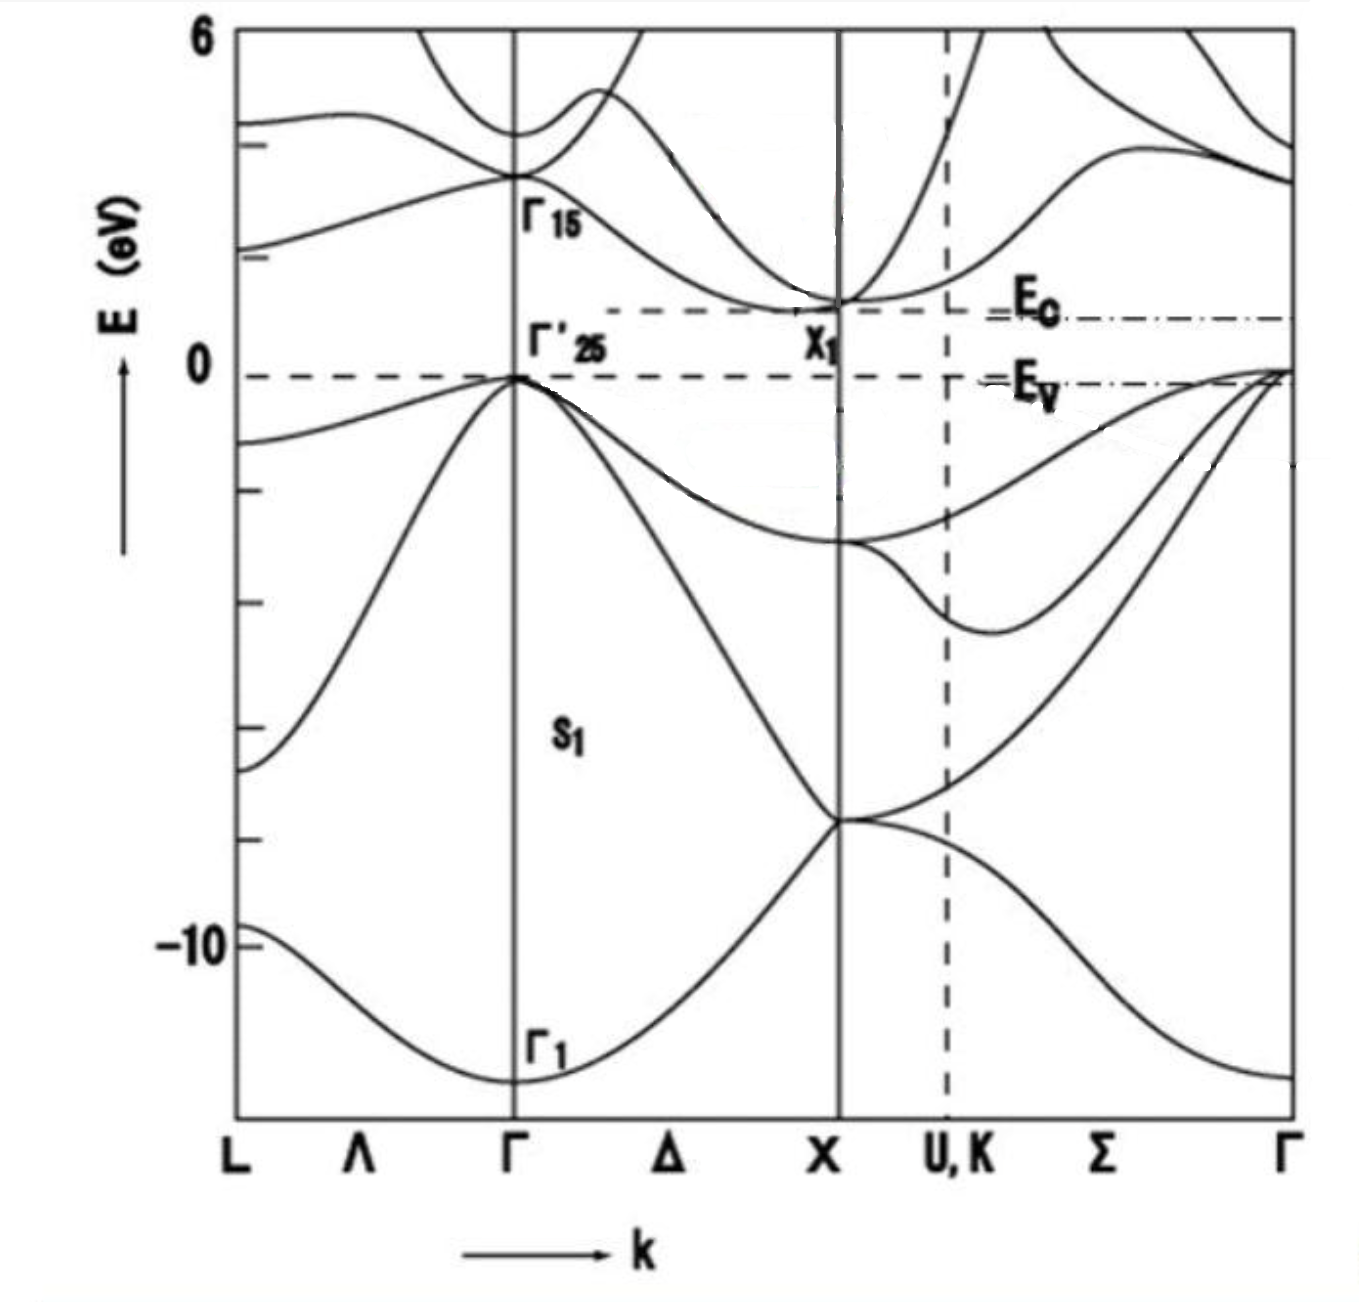 Fig.4 Diagram of the Energy Band Structure of a Silicon Crystal